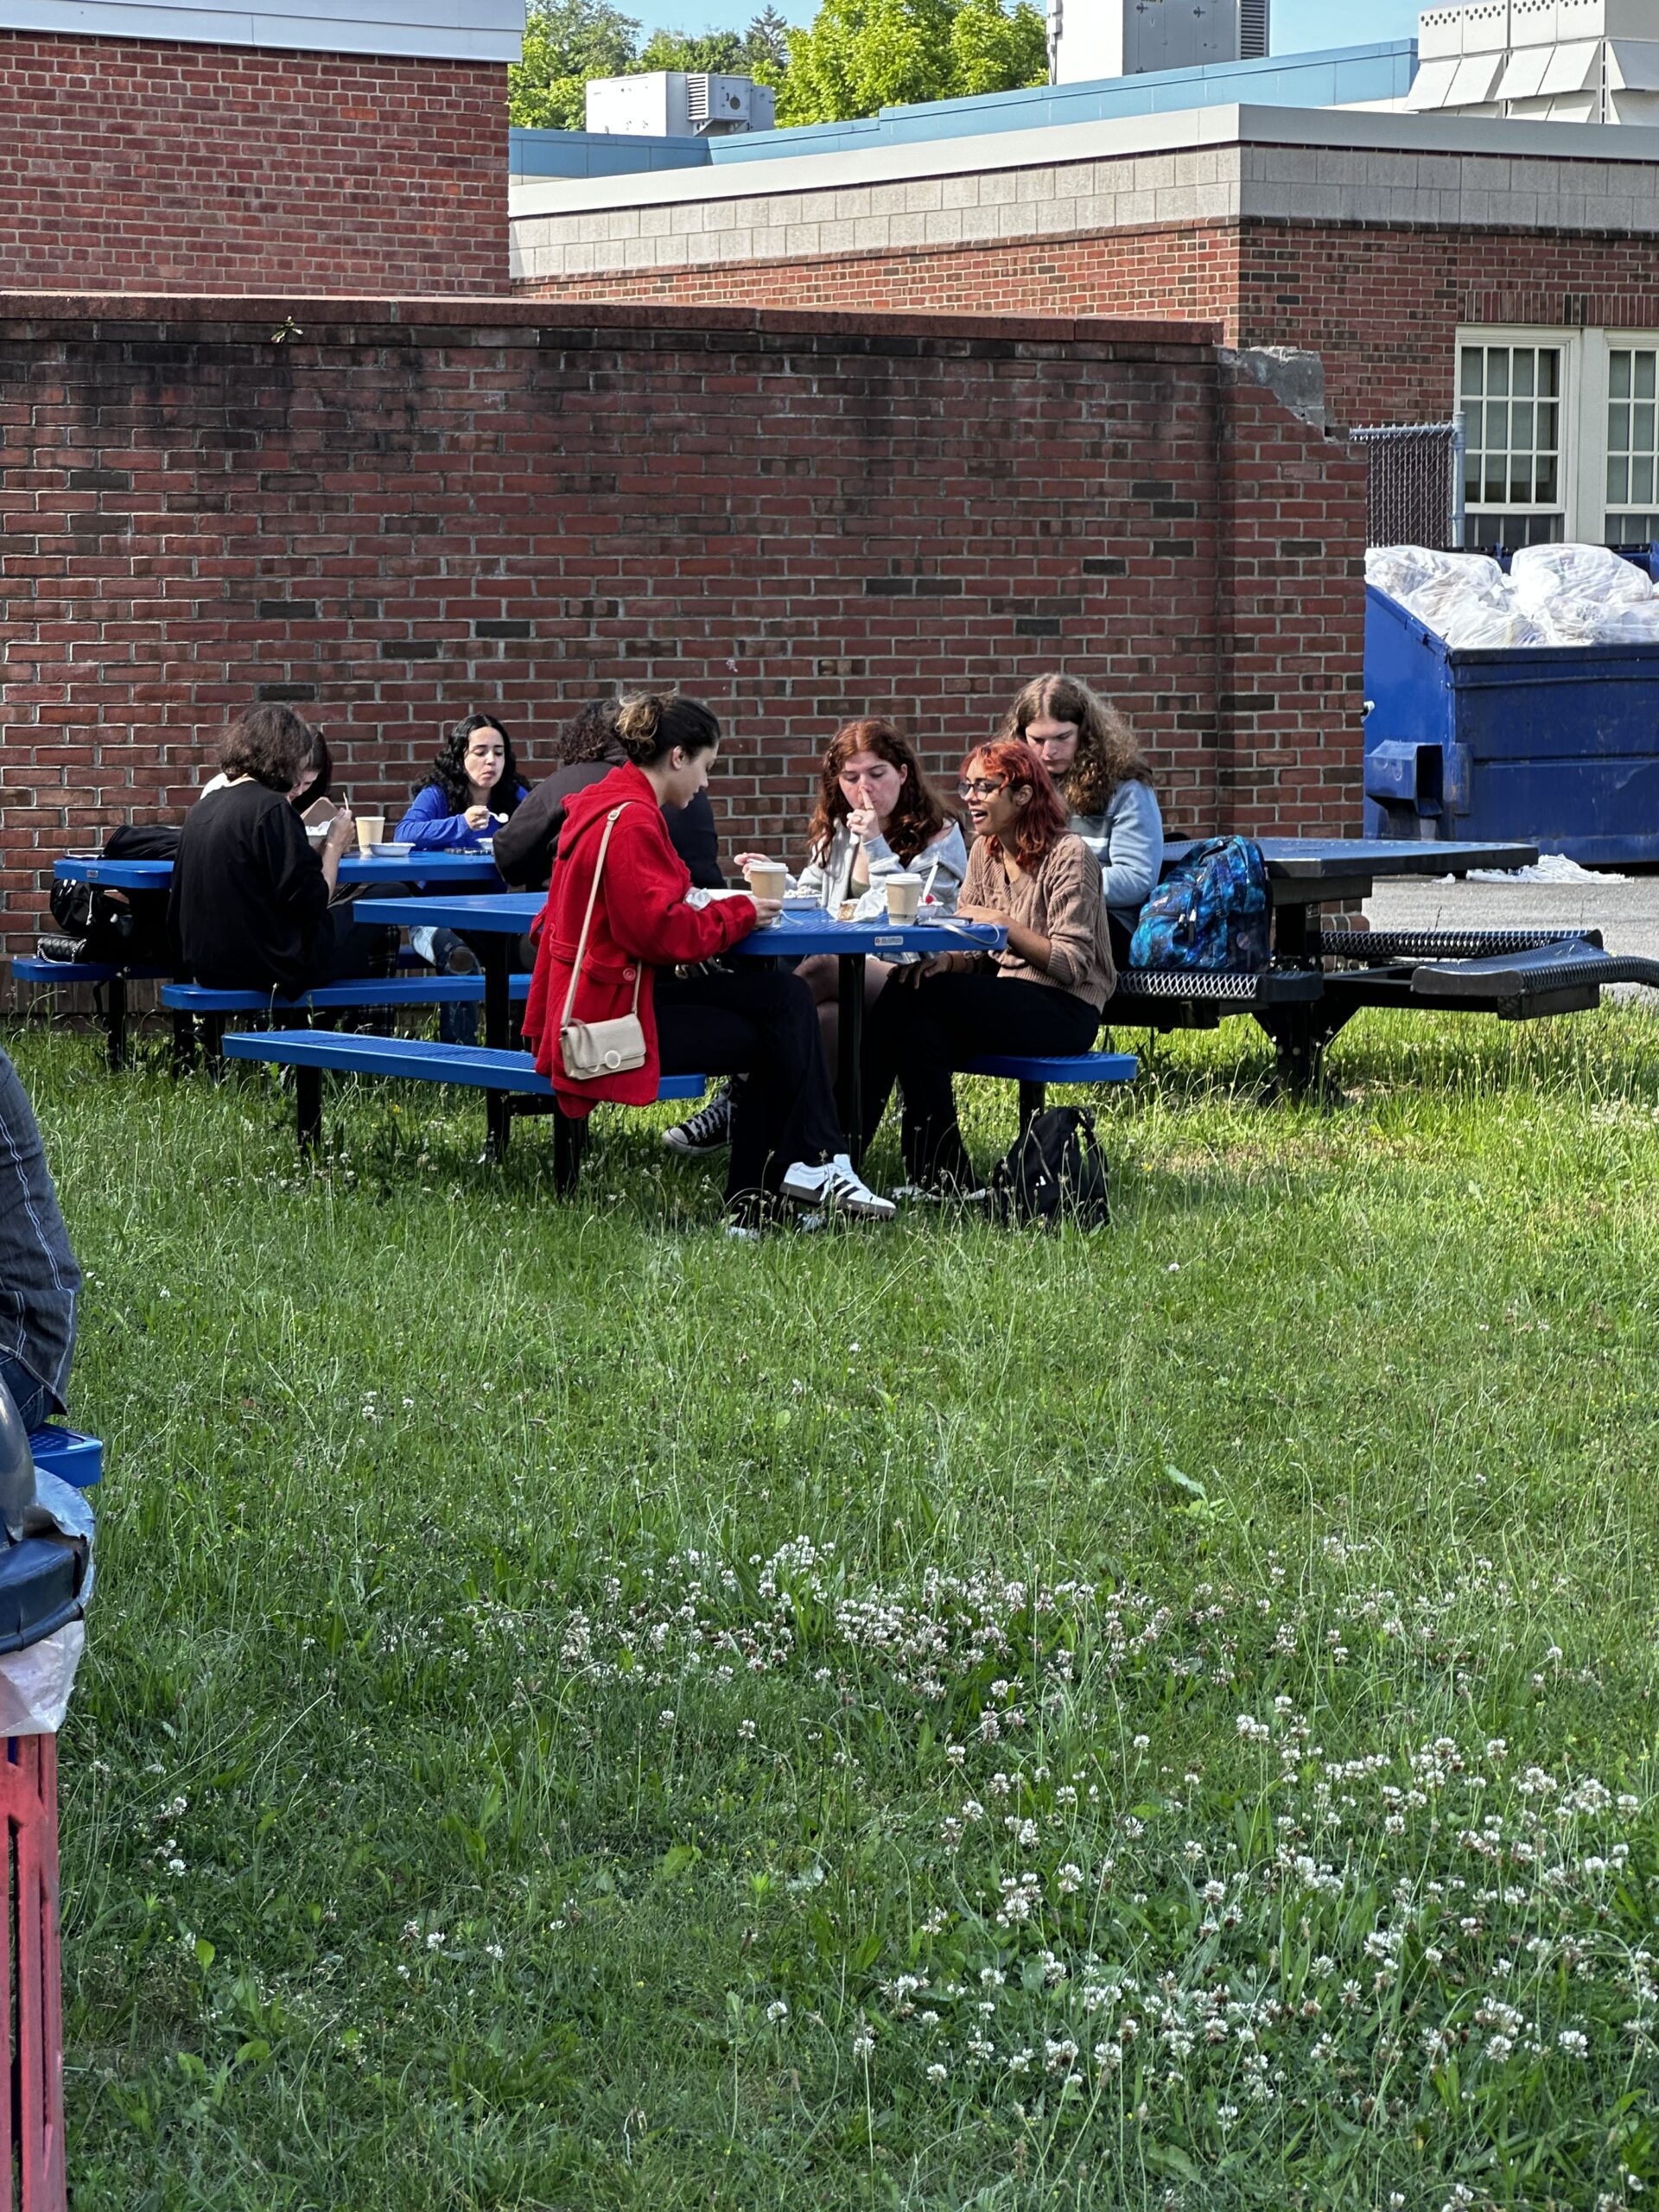 students eating ice cream at outdoor tables